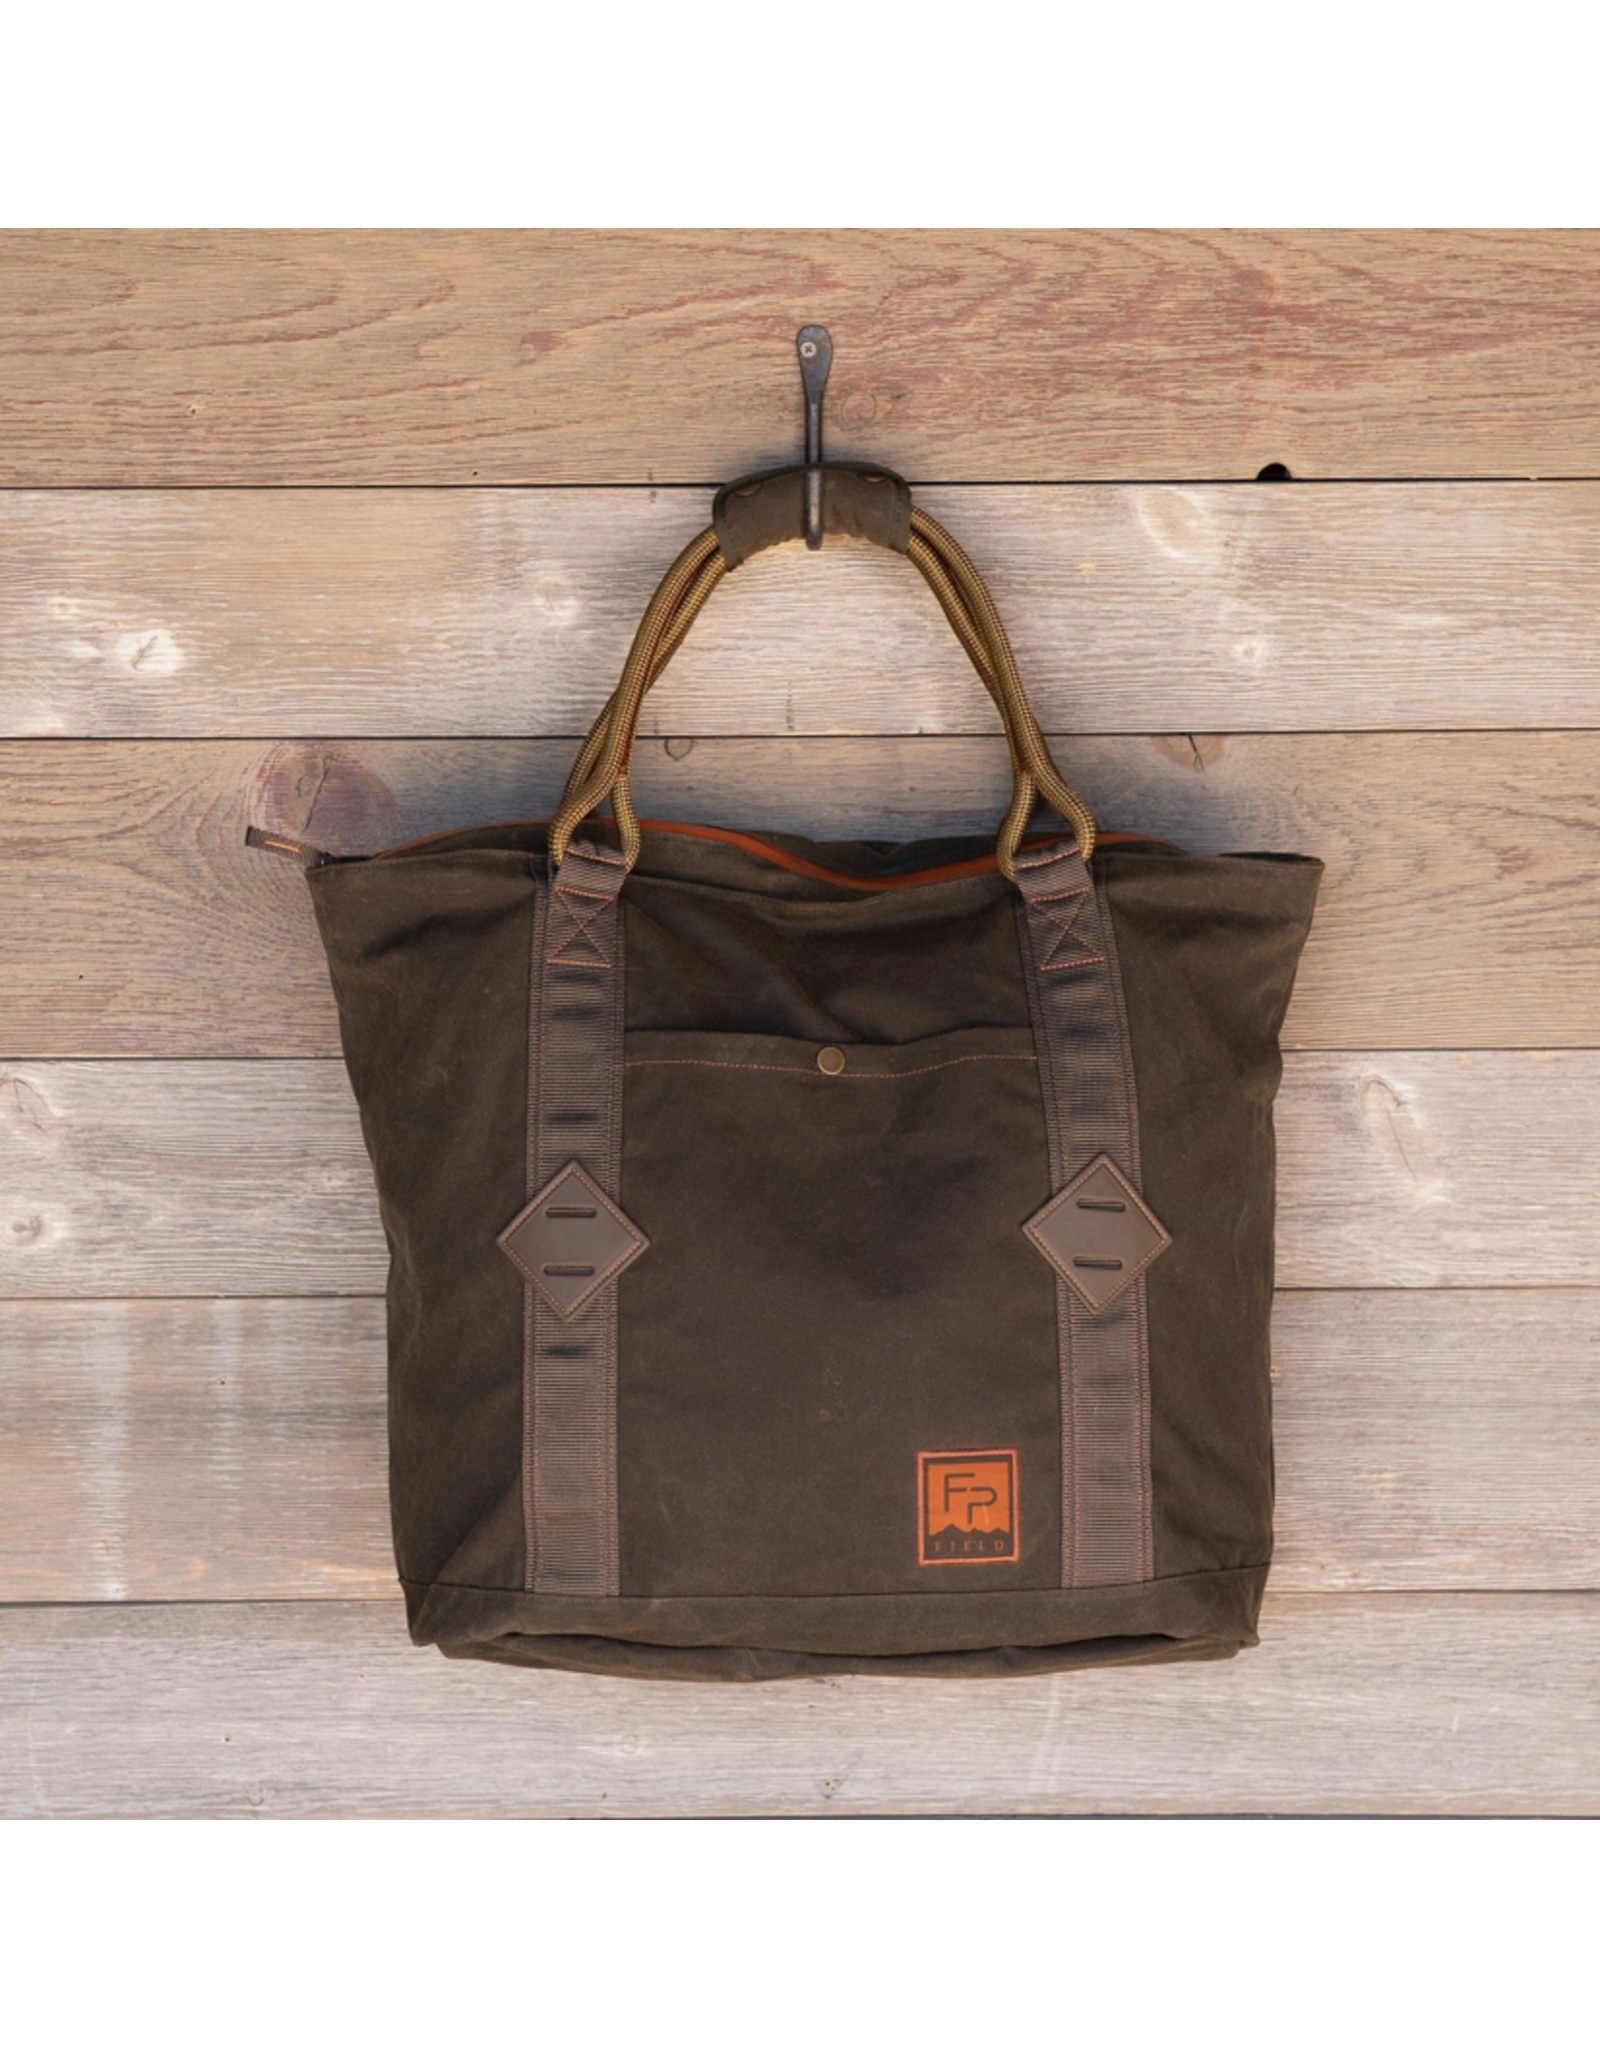 Fishpond Fishpond - Horse Thief Tote